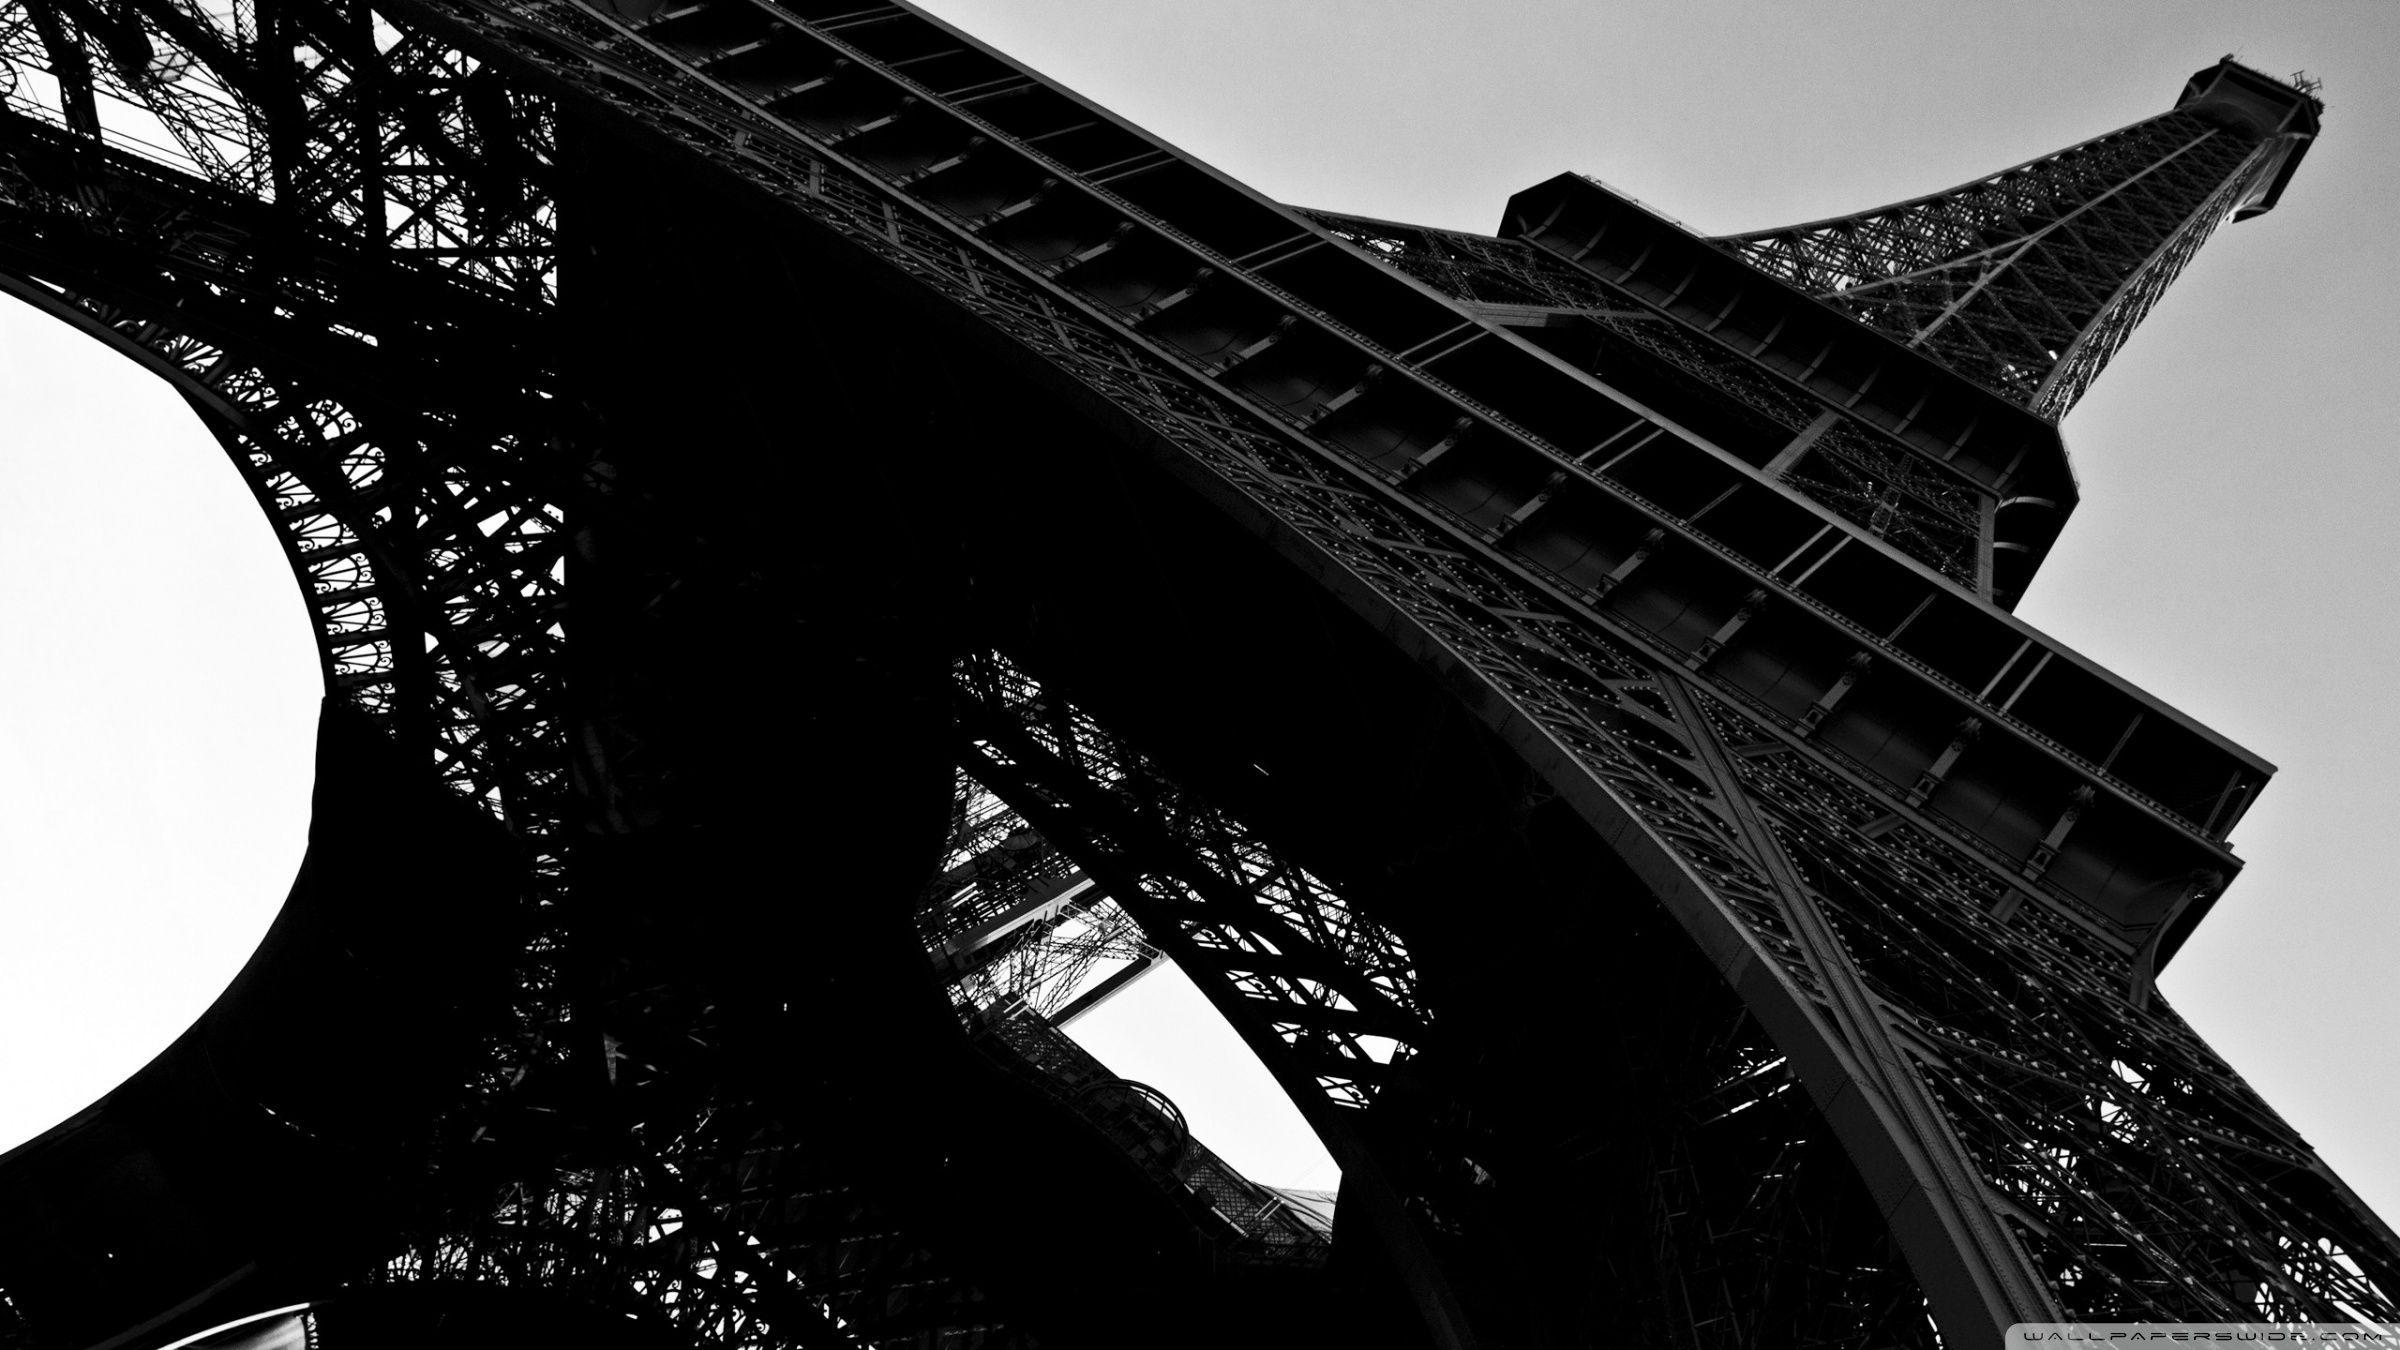 The Eiffel Tower is a wrought iron lattice tower on the Champ de Mars in Paris, France. It is named after the engineer Gustave Eiffel, whose company designed and built the tower. - Paris, Eiffel Tower